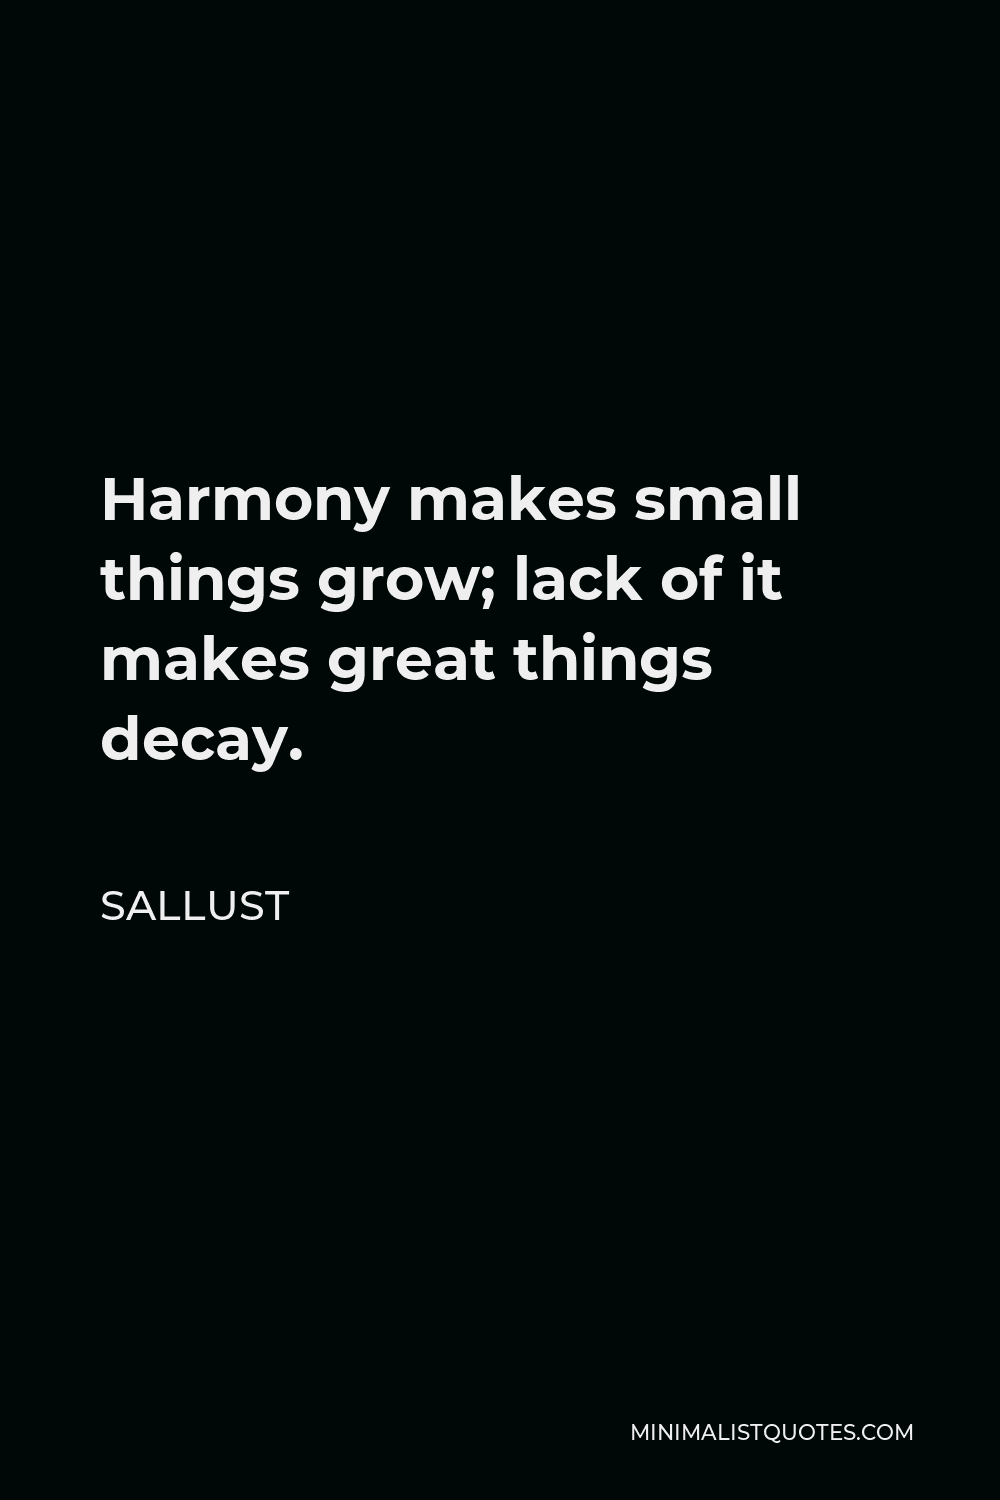 Sallust Quote - Harmony makes small things grow; lack of it makes great things decay.